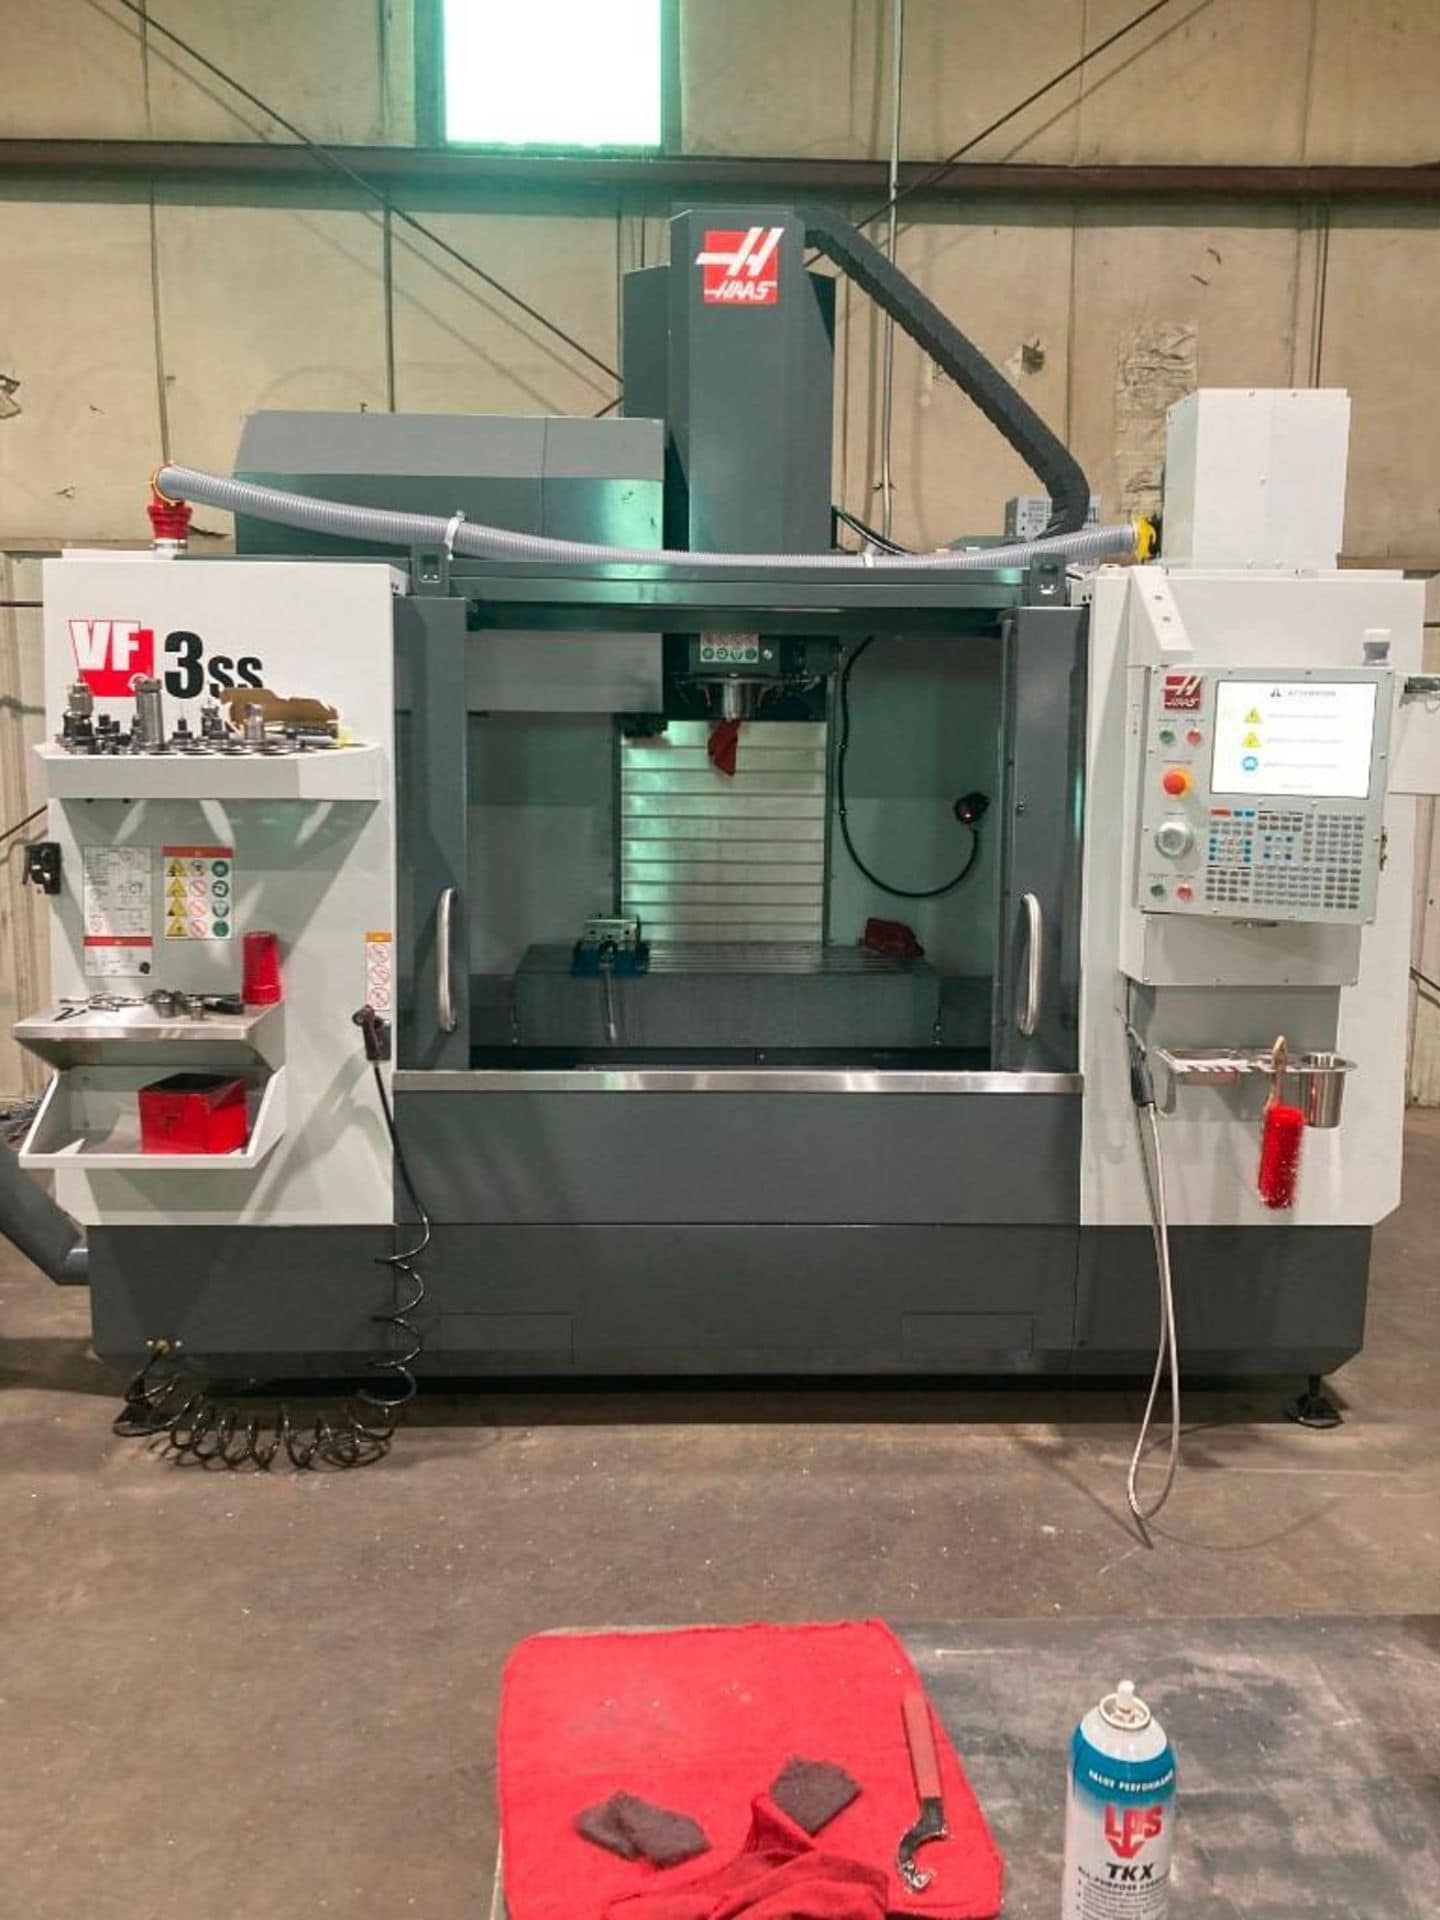 2022 haas vf 3ss vertical machining center wireless probing 12k spindle